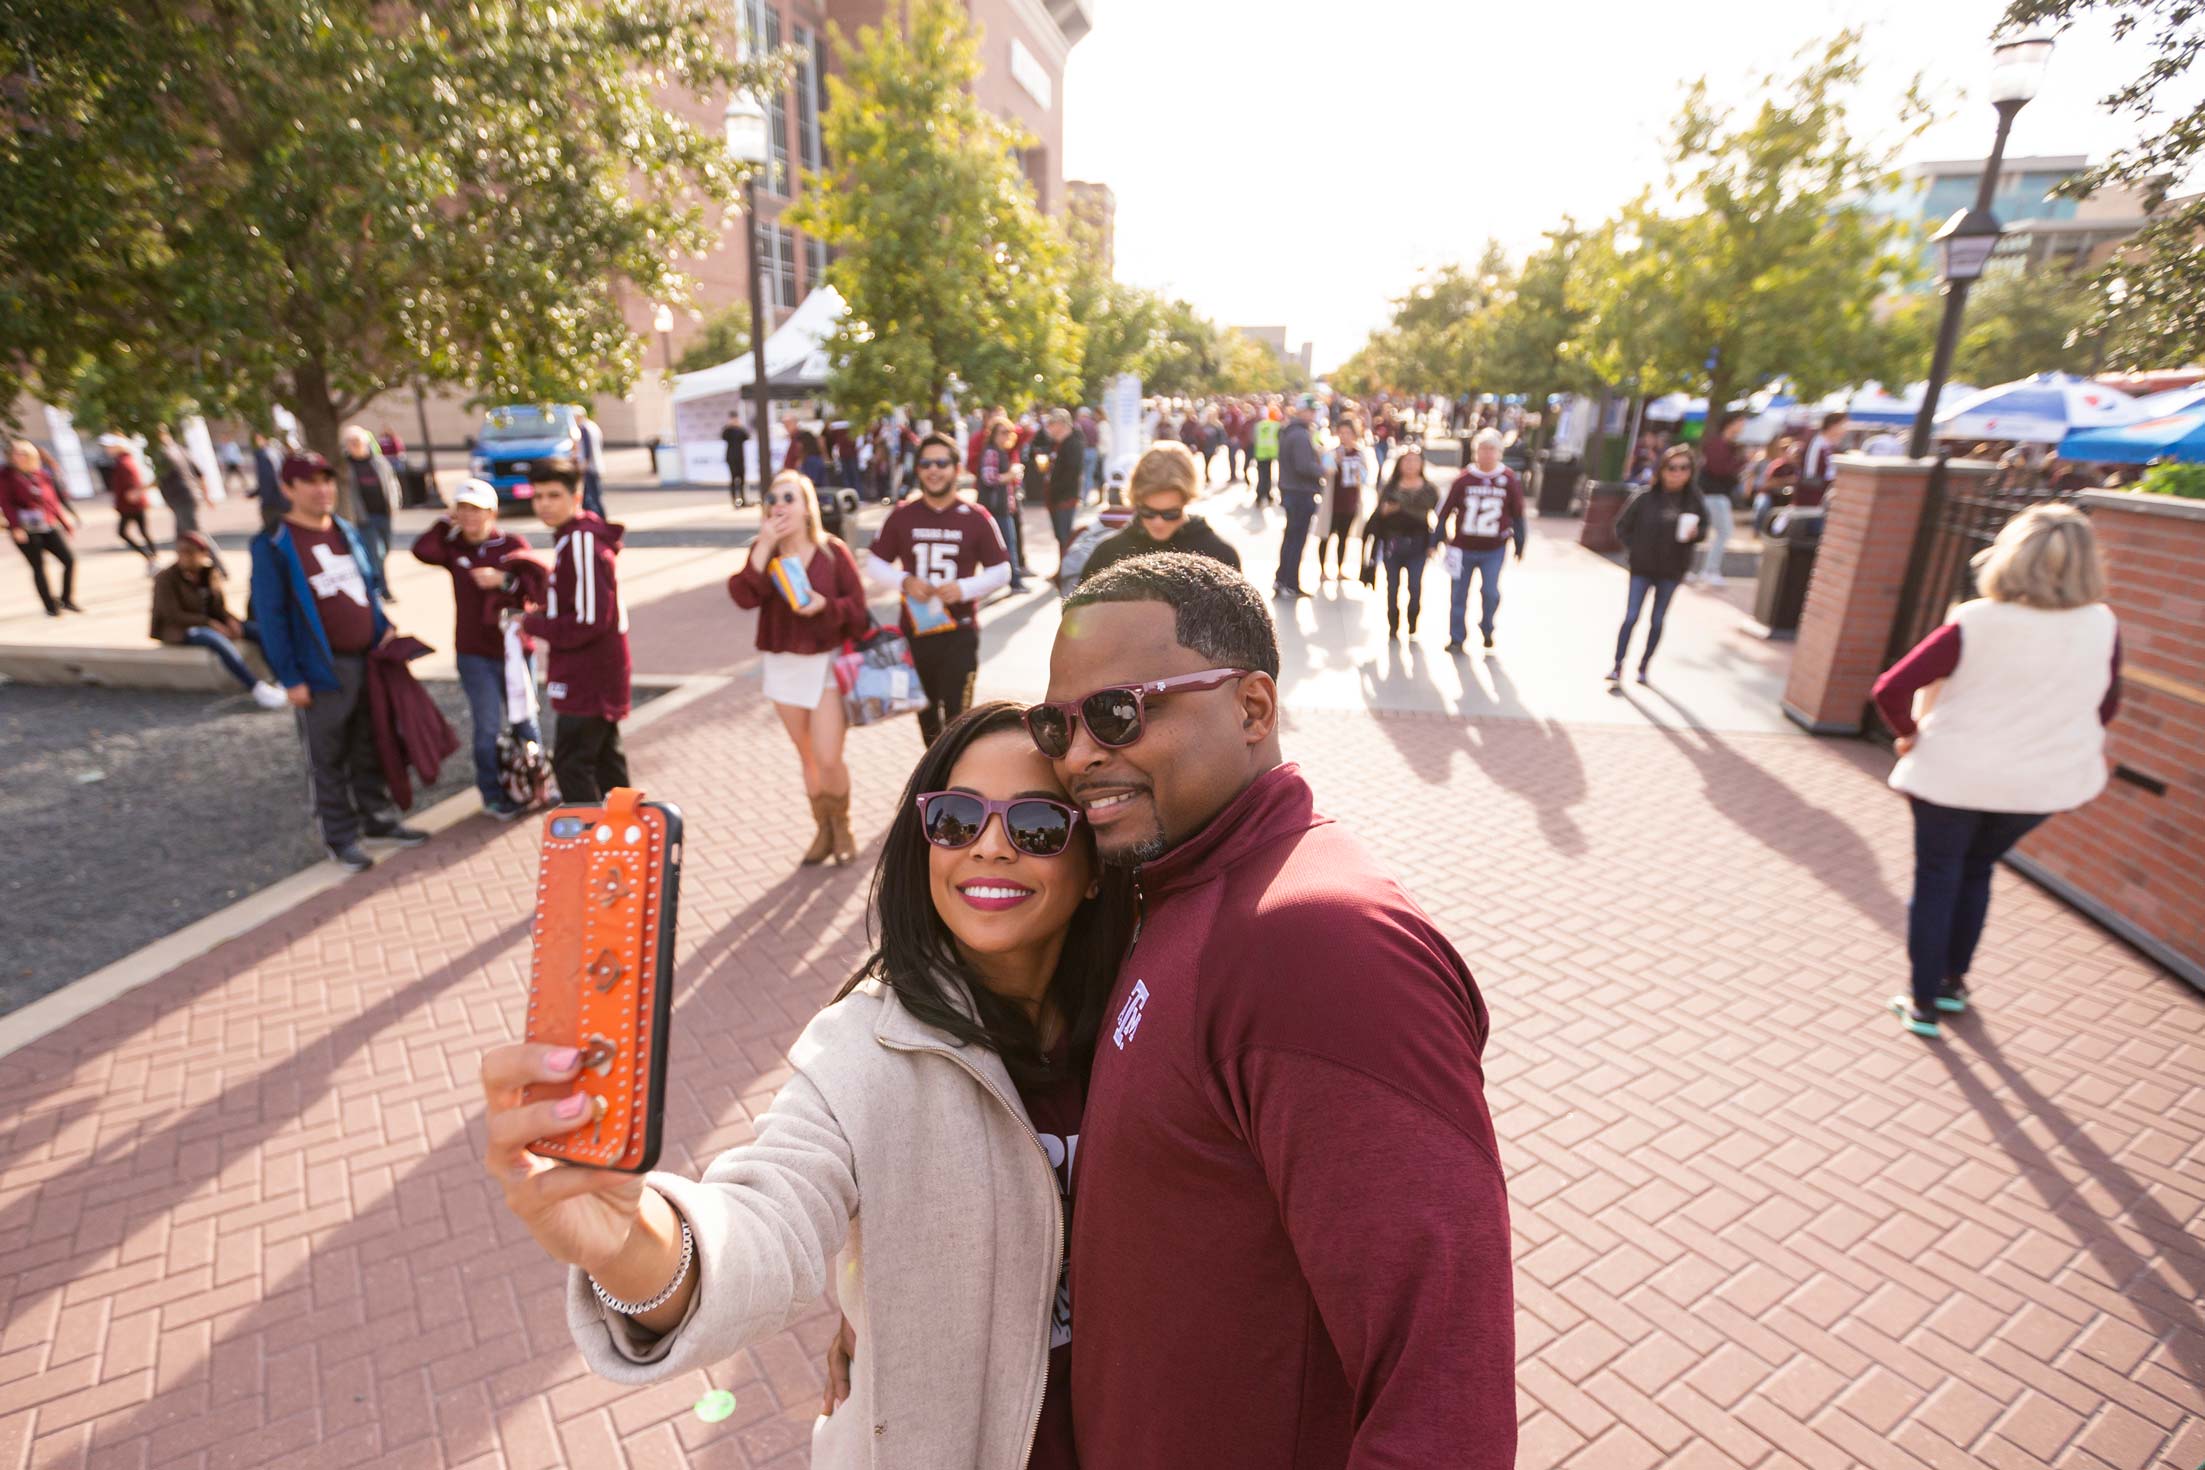 A couple taking a selfie outside of the stadium with other people in the background